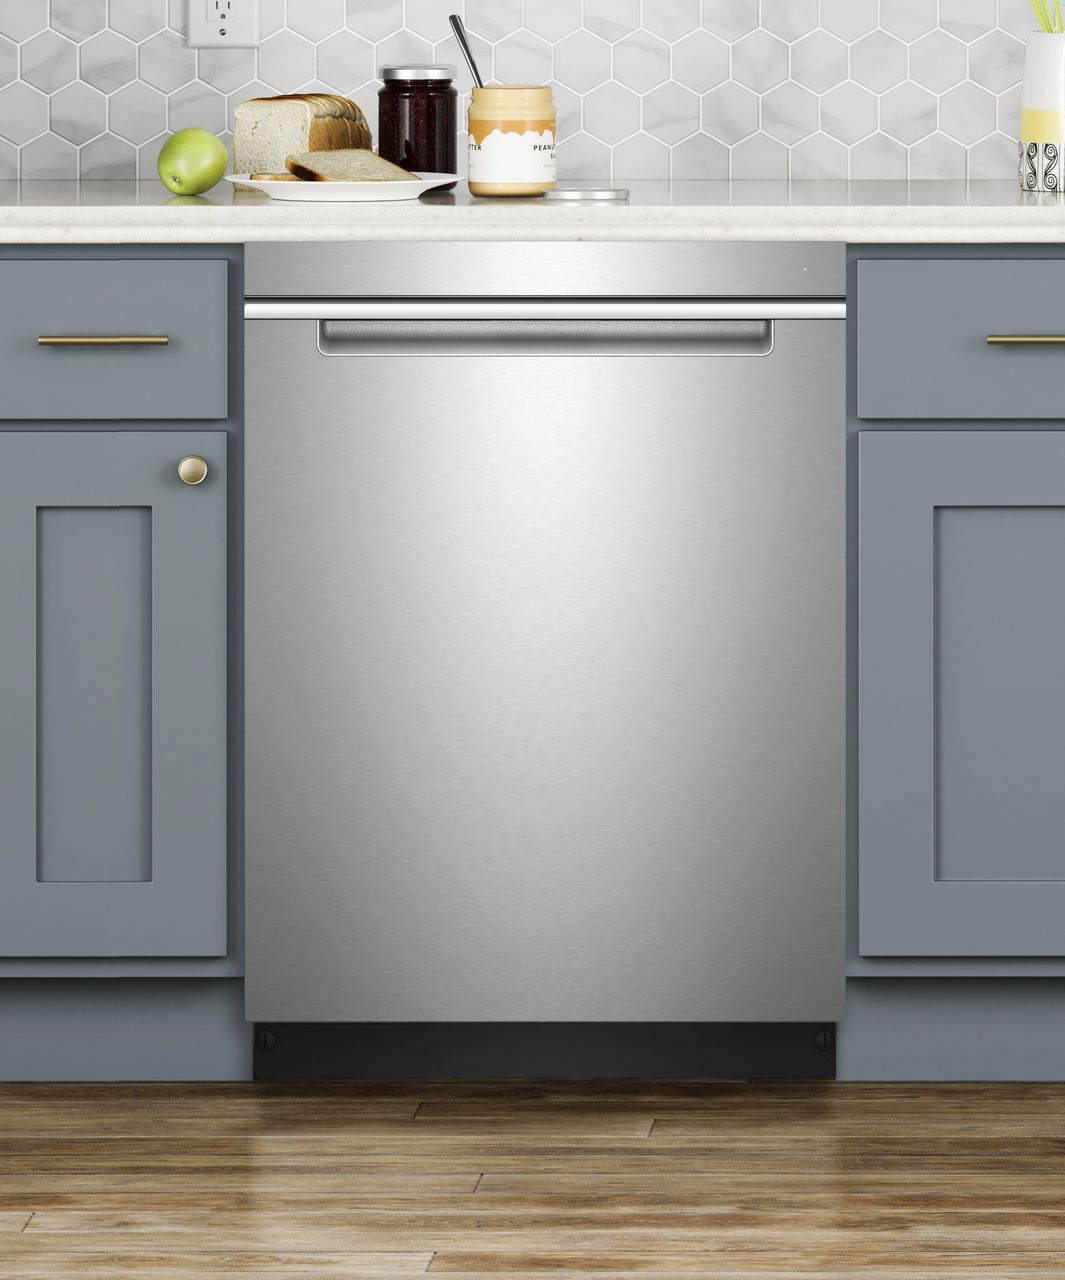 Whirlpool 24" Built-In Dishwasher Stainless steel WDTA50SAHZ - Best Buy Whirlpool Stainless Steel Built-in Dishwasher